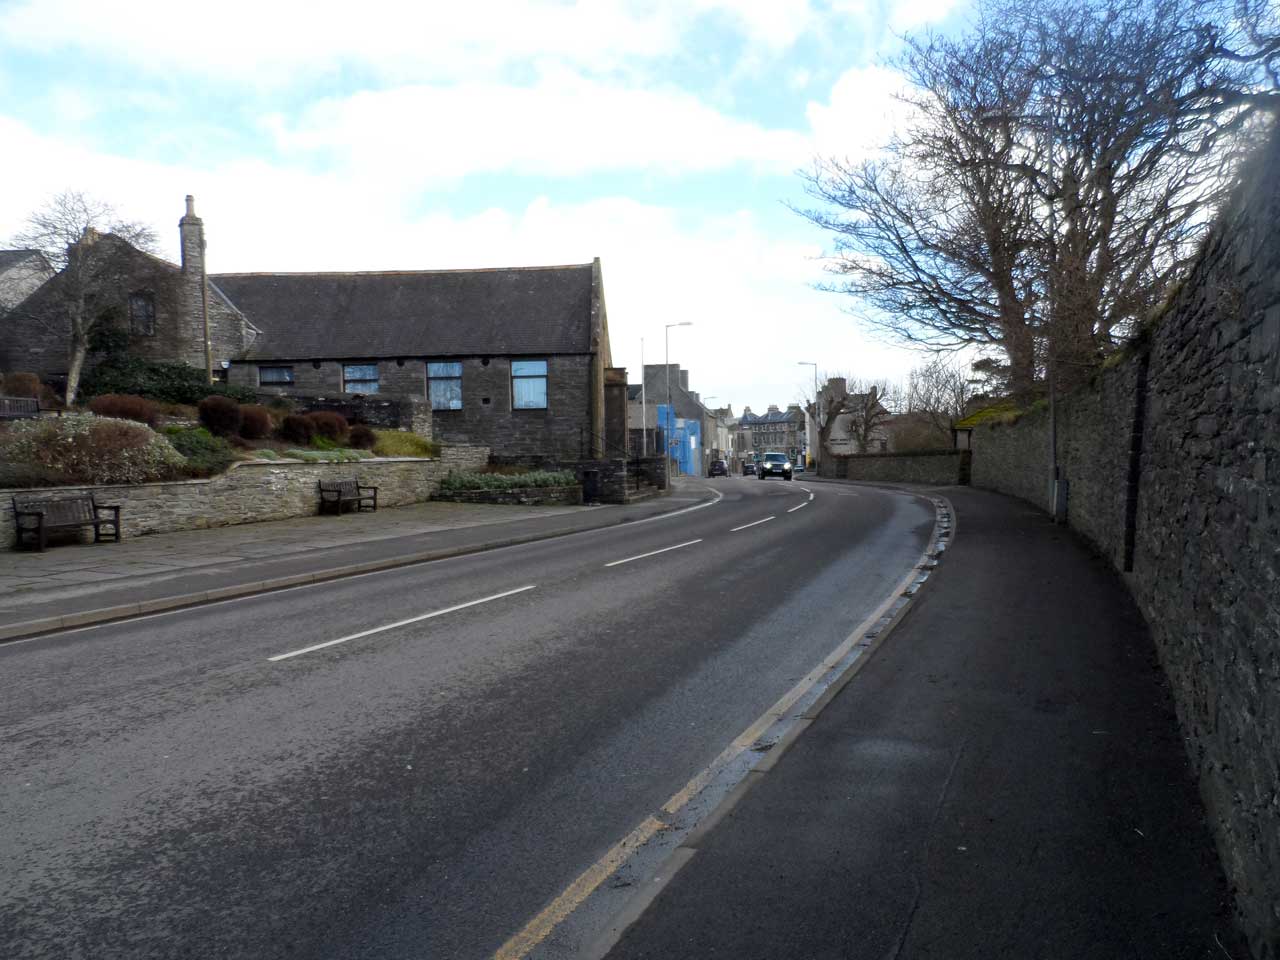 Photo: High Street, Wick - Sunday 19th March 2017